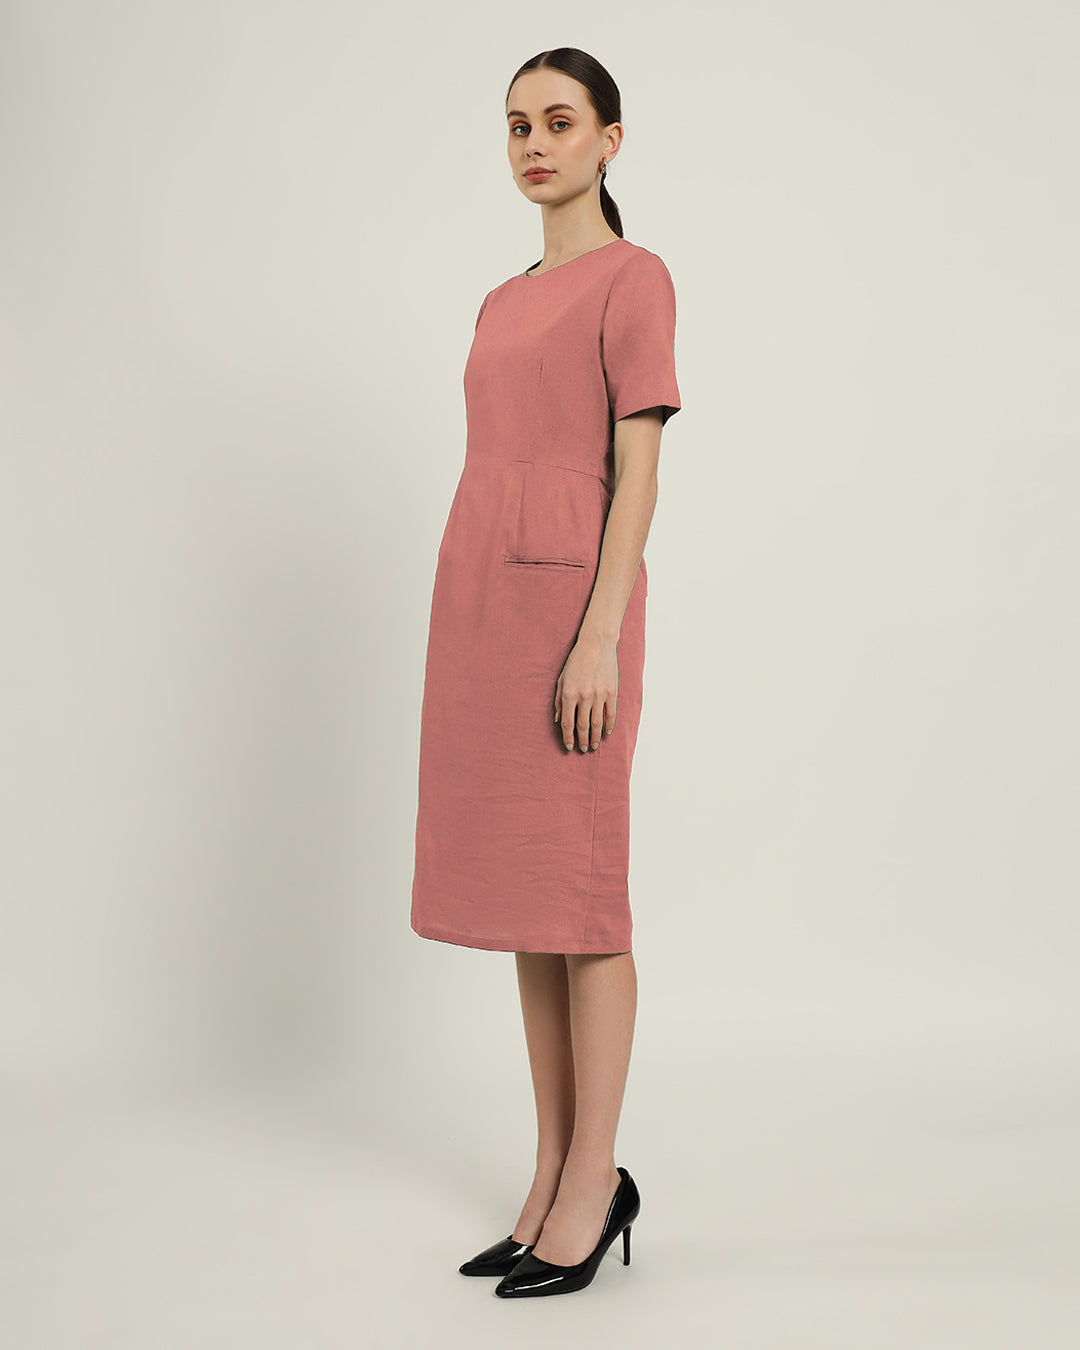 The Cairo Ivory Pink Cotton Dress